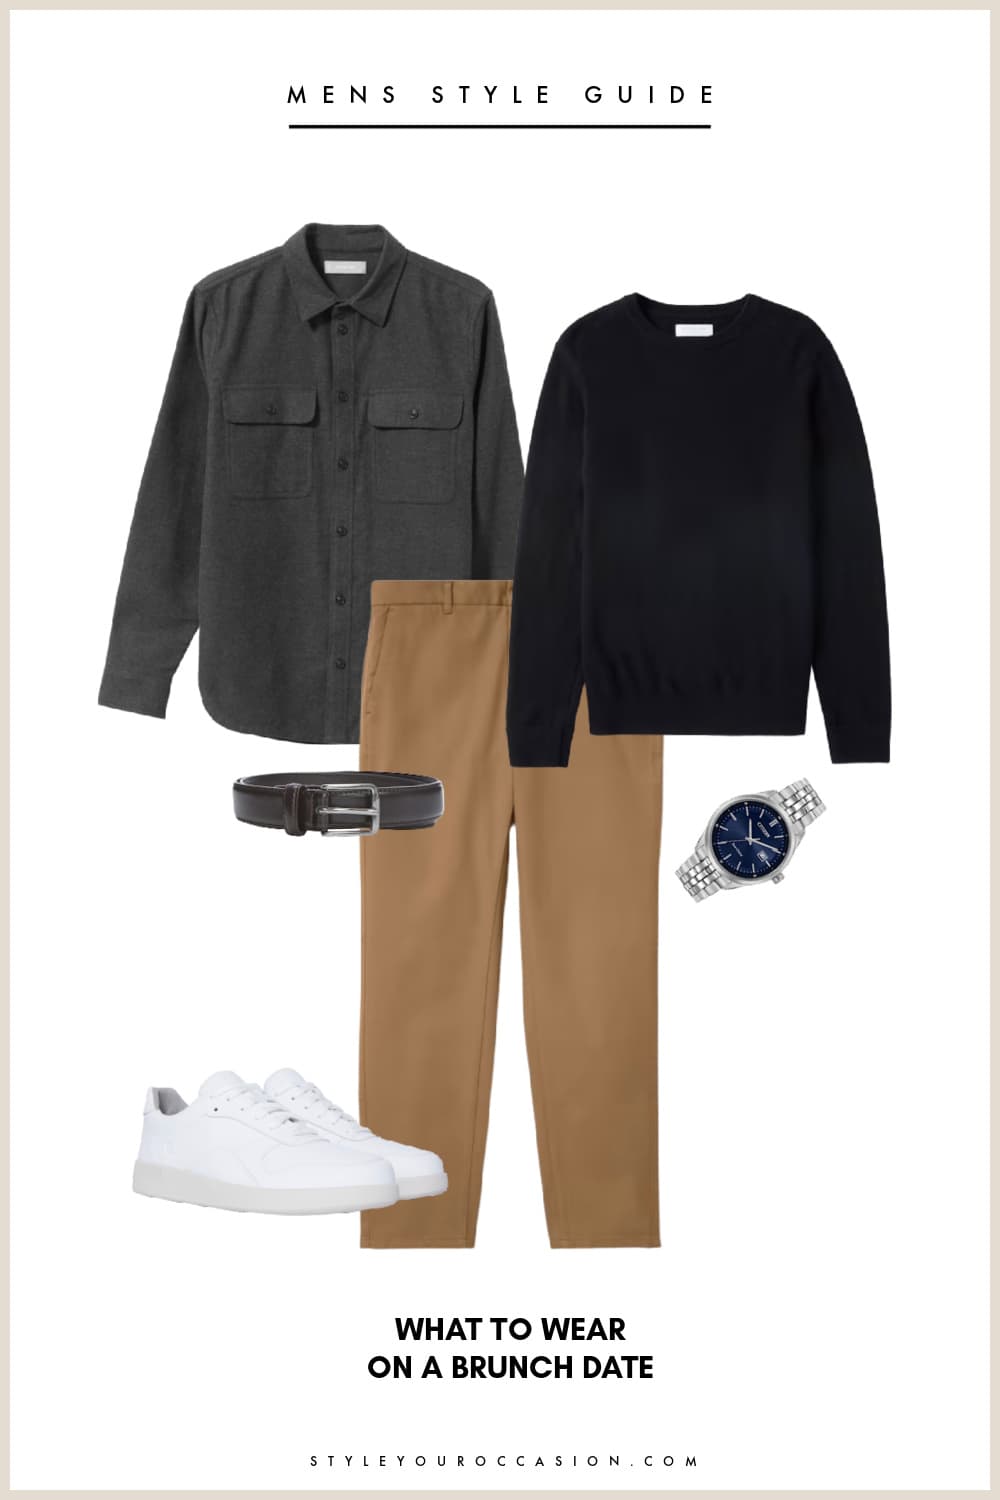 An image board of a mens brunch date outfit with tan chinos, a black sweater, a grey shacket, white sneakers, a black belt, and a silver watch